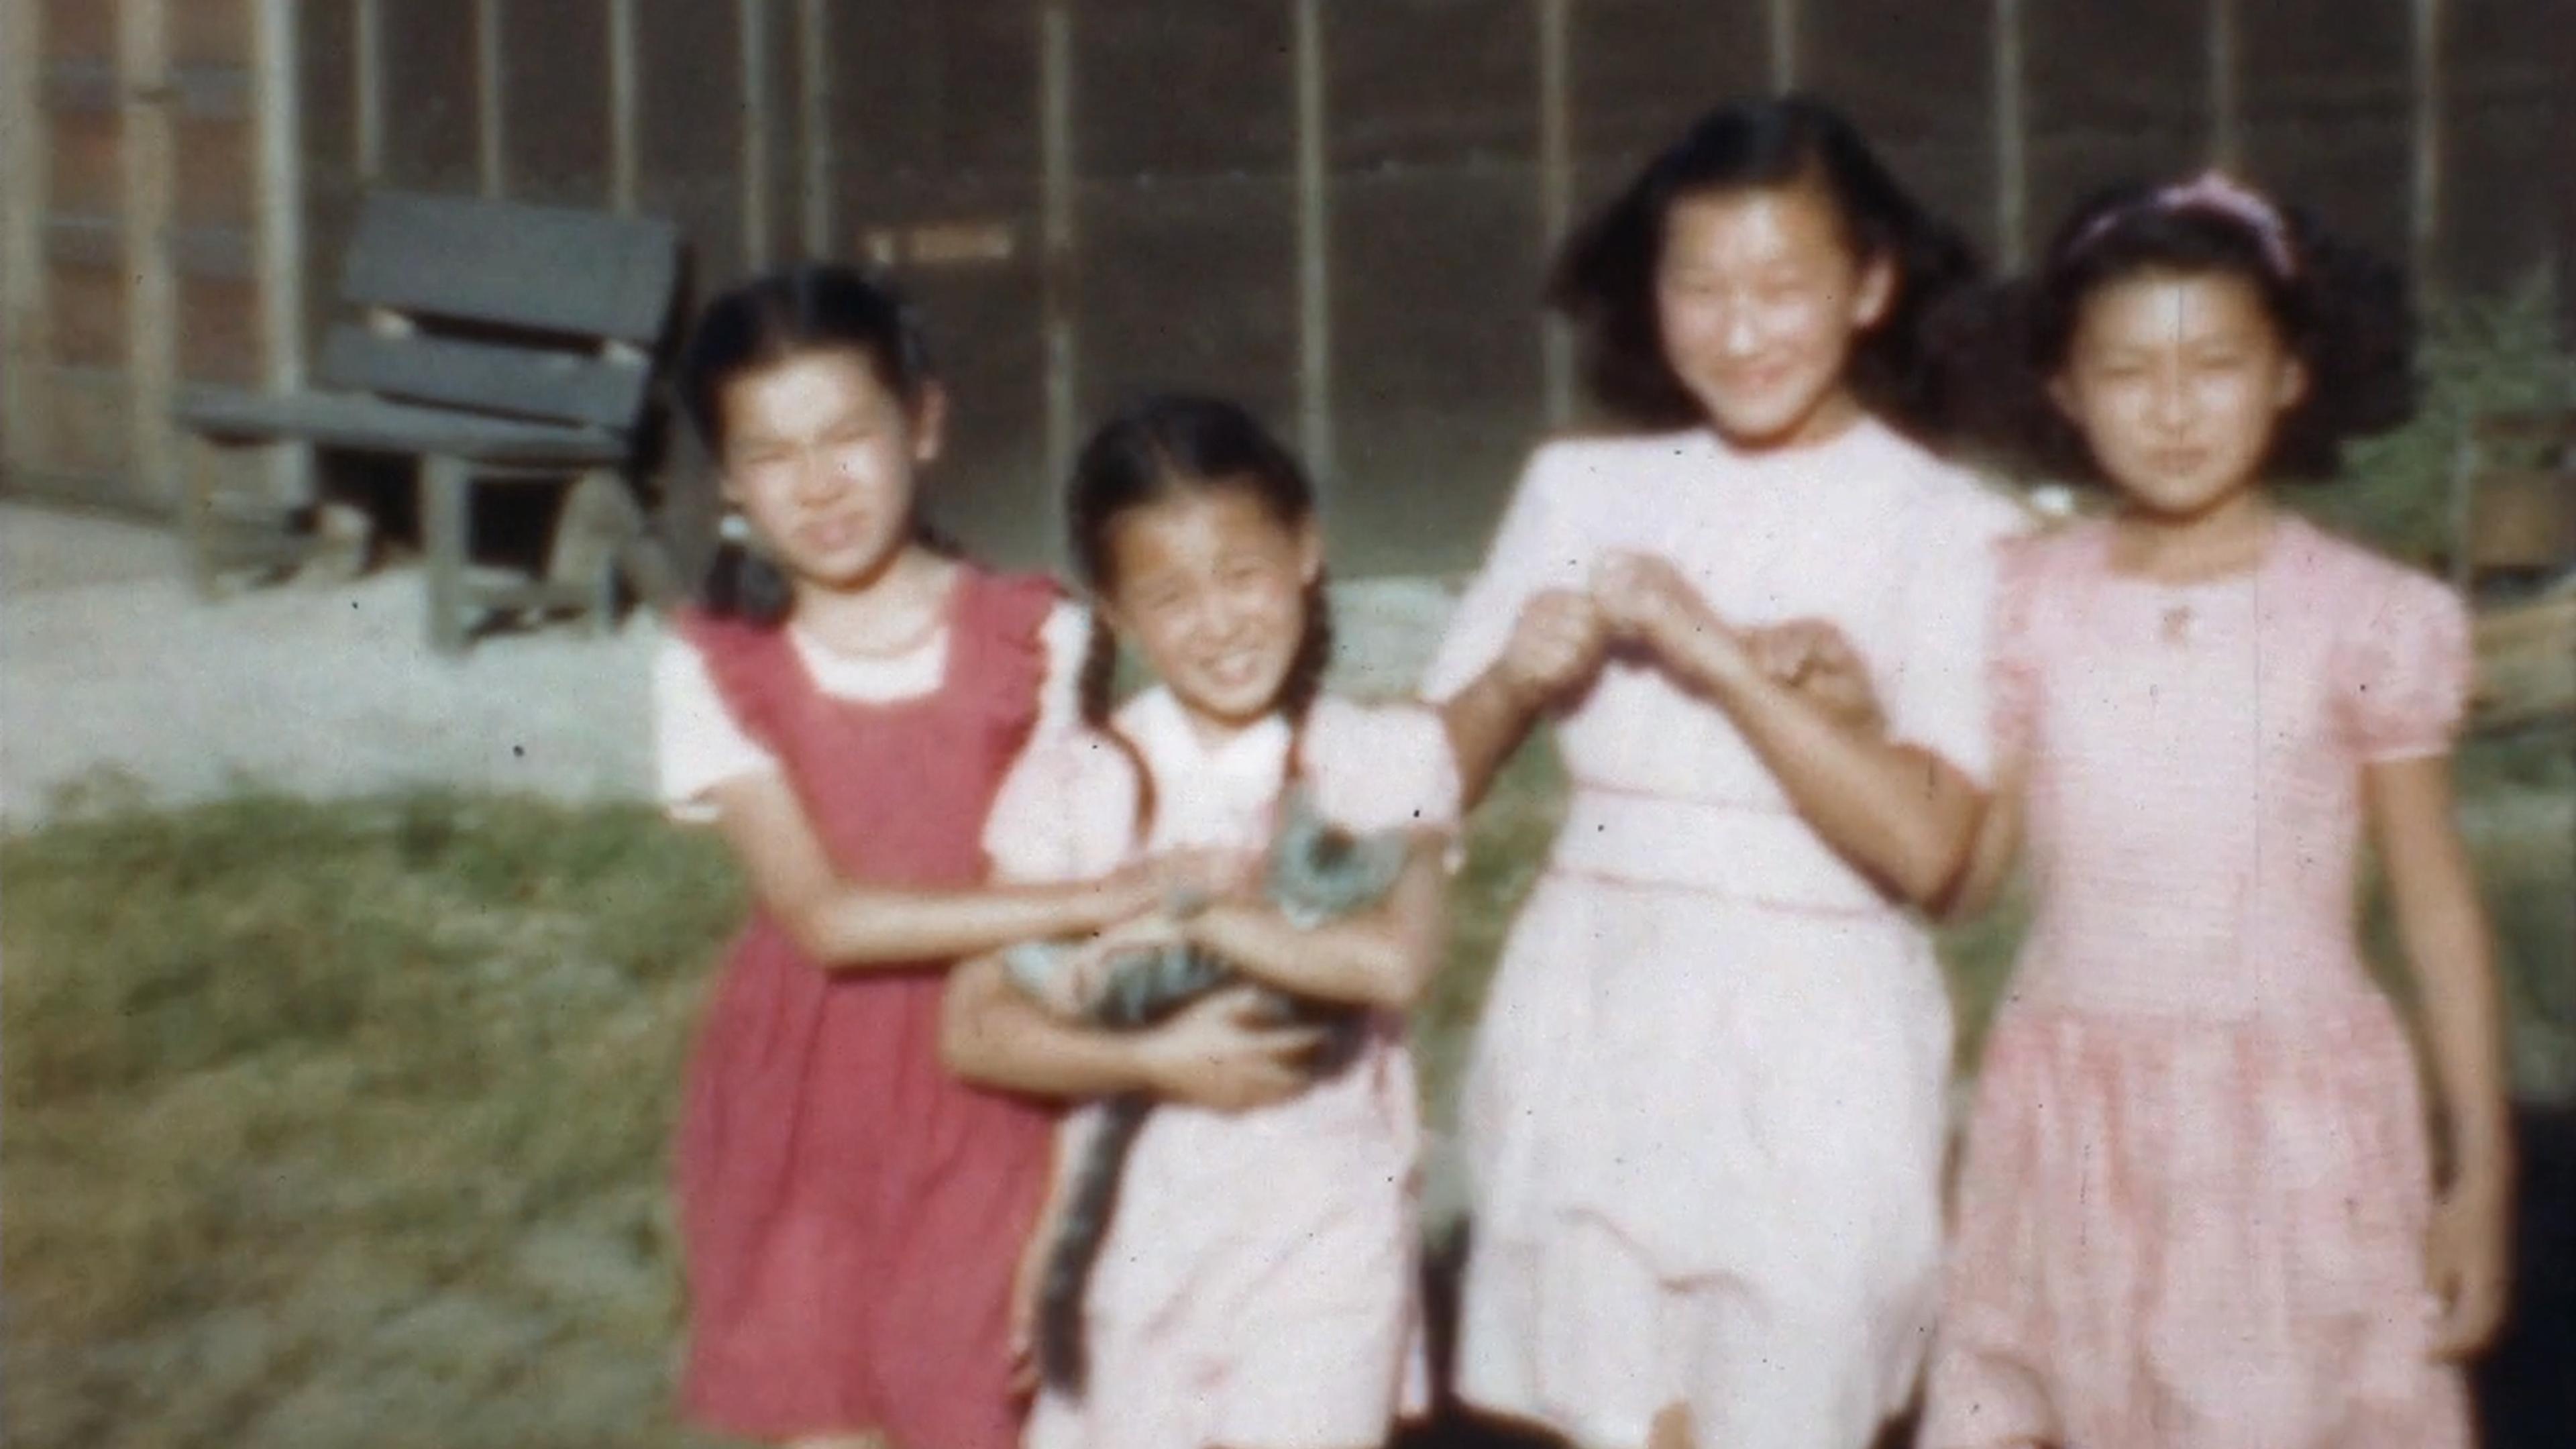 Four young girls in dresses smile outside, with one holding a small cat.